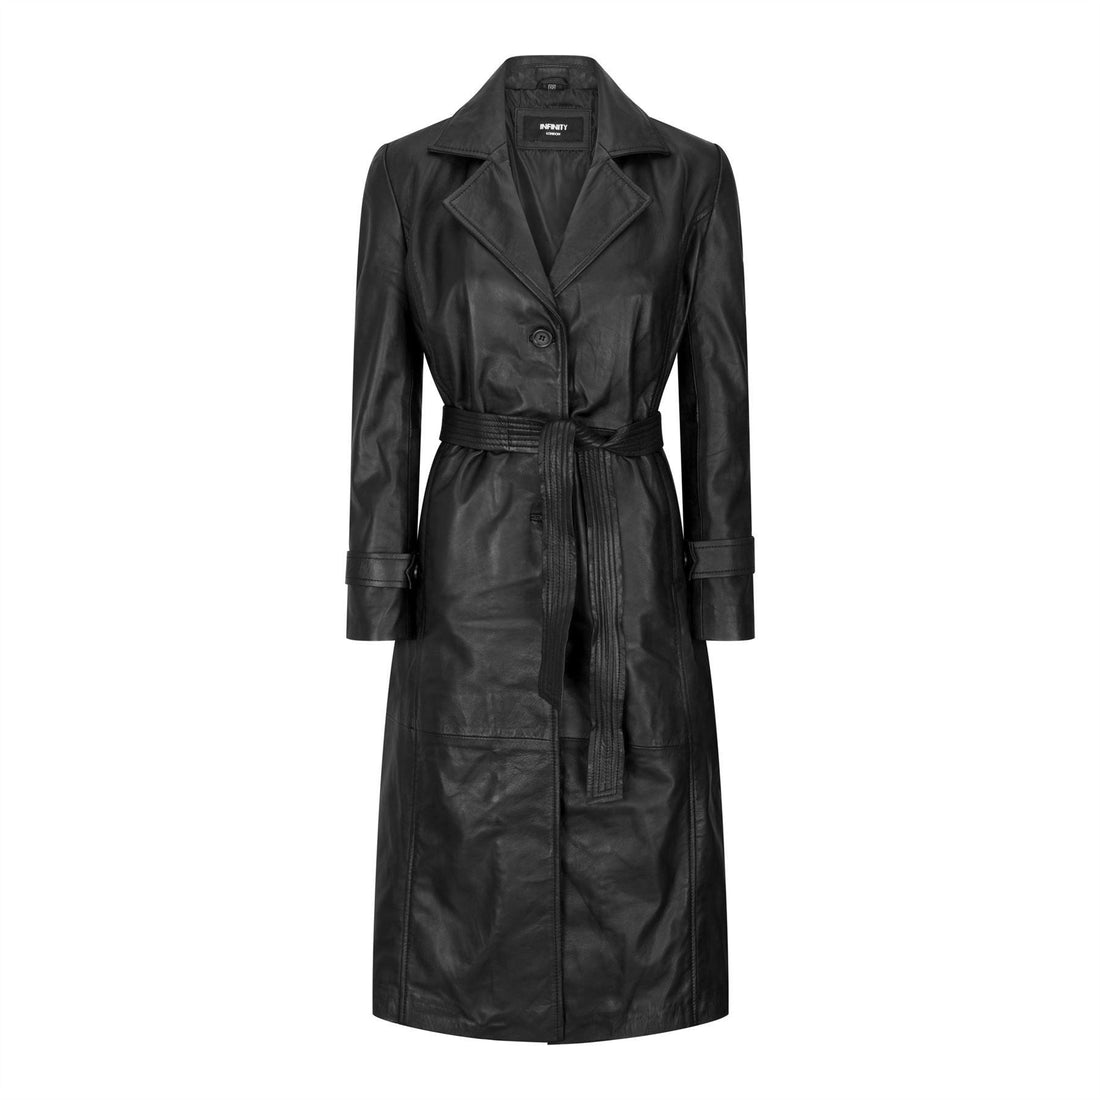 Womens Real Leather Trench Coat Mac Classic 3/4 Long Black 1980s Vintage Retro - Knighthood Store